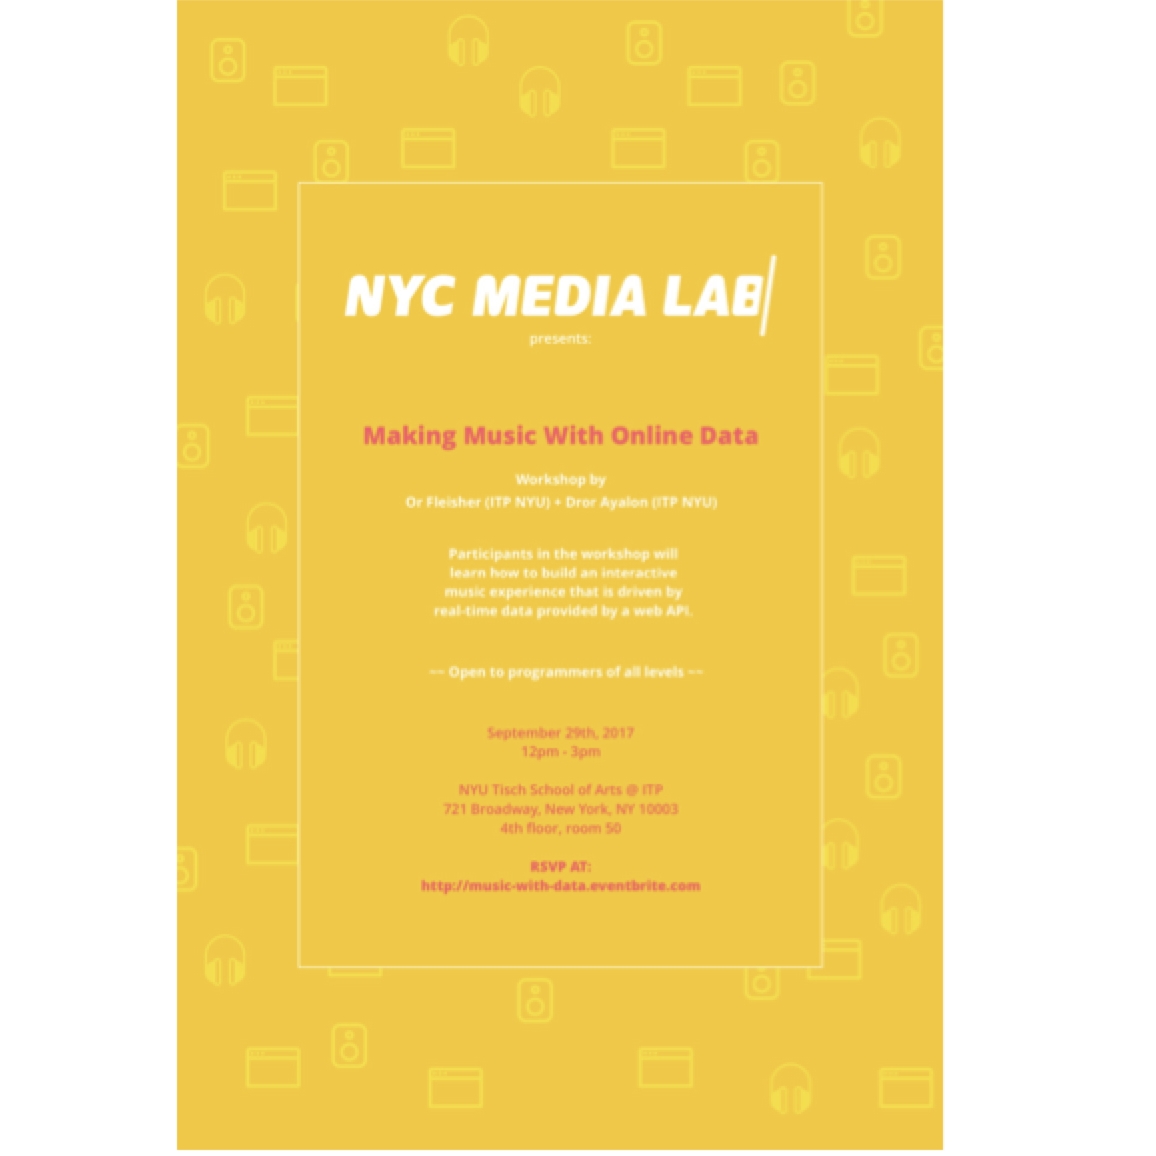 flyer for NYC Media Lab event Making Music with Online Data